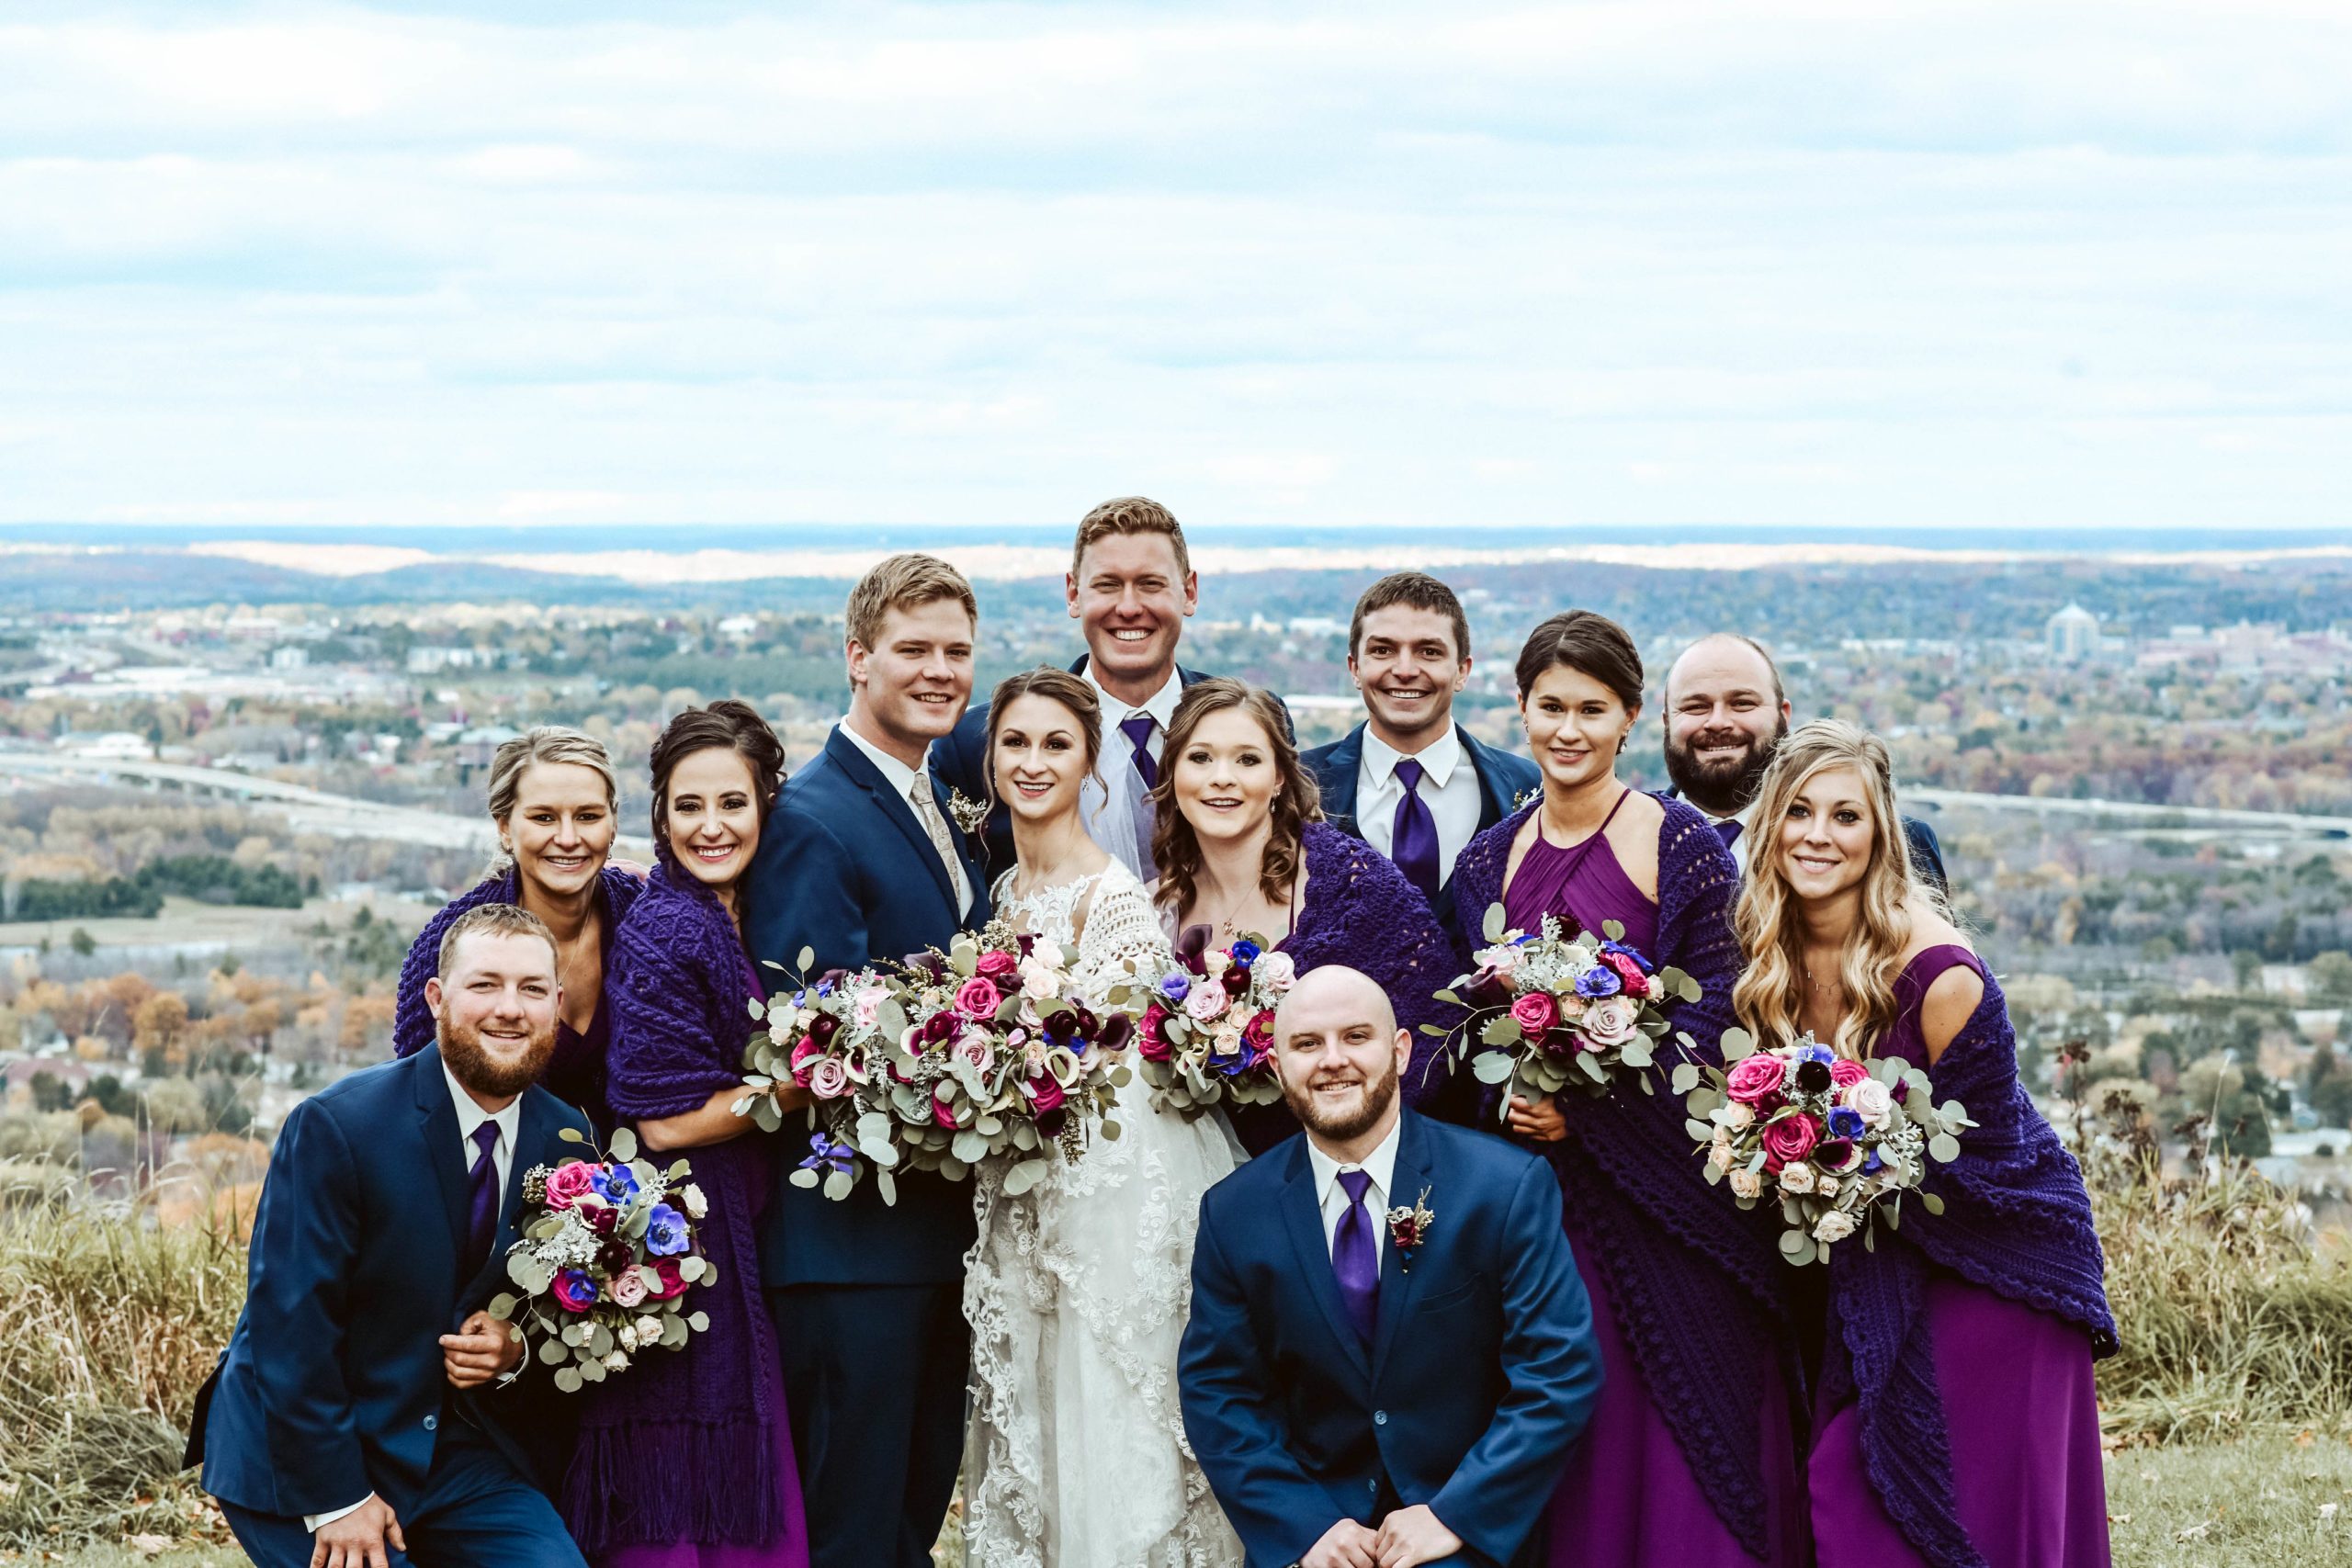 A wedding party photographed in Wisconsin